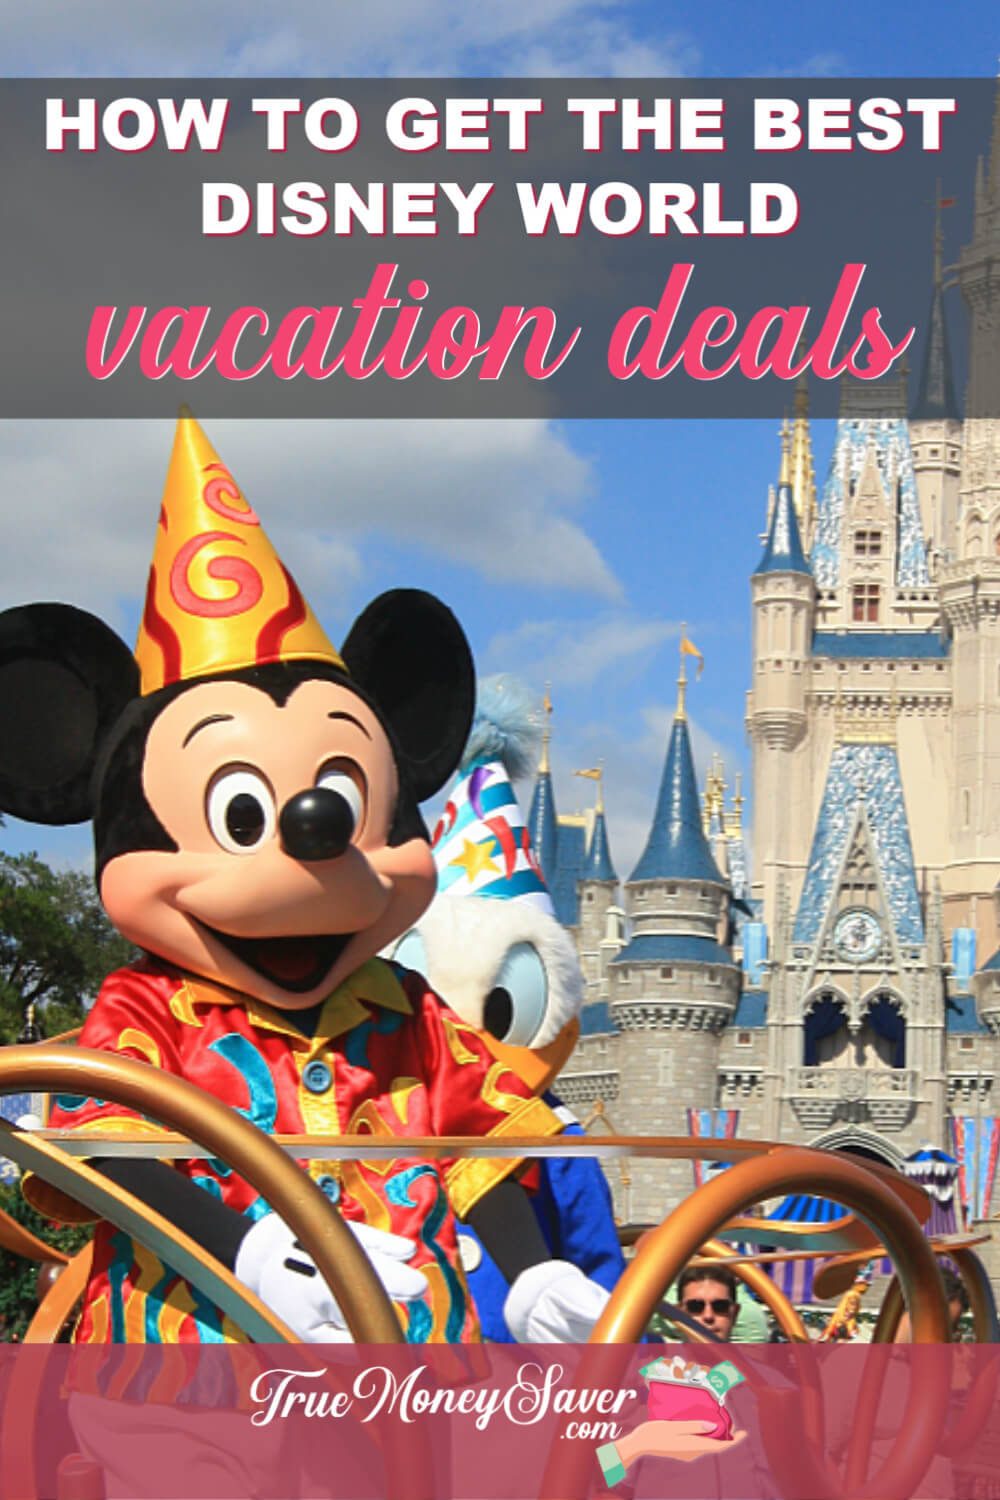 How To Get The Best Disney World Vacation Deals